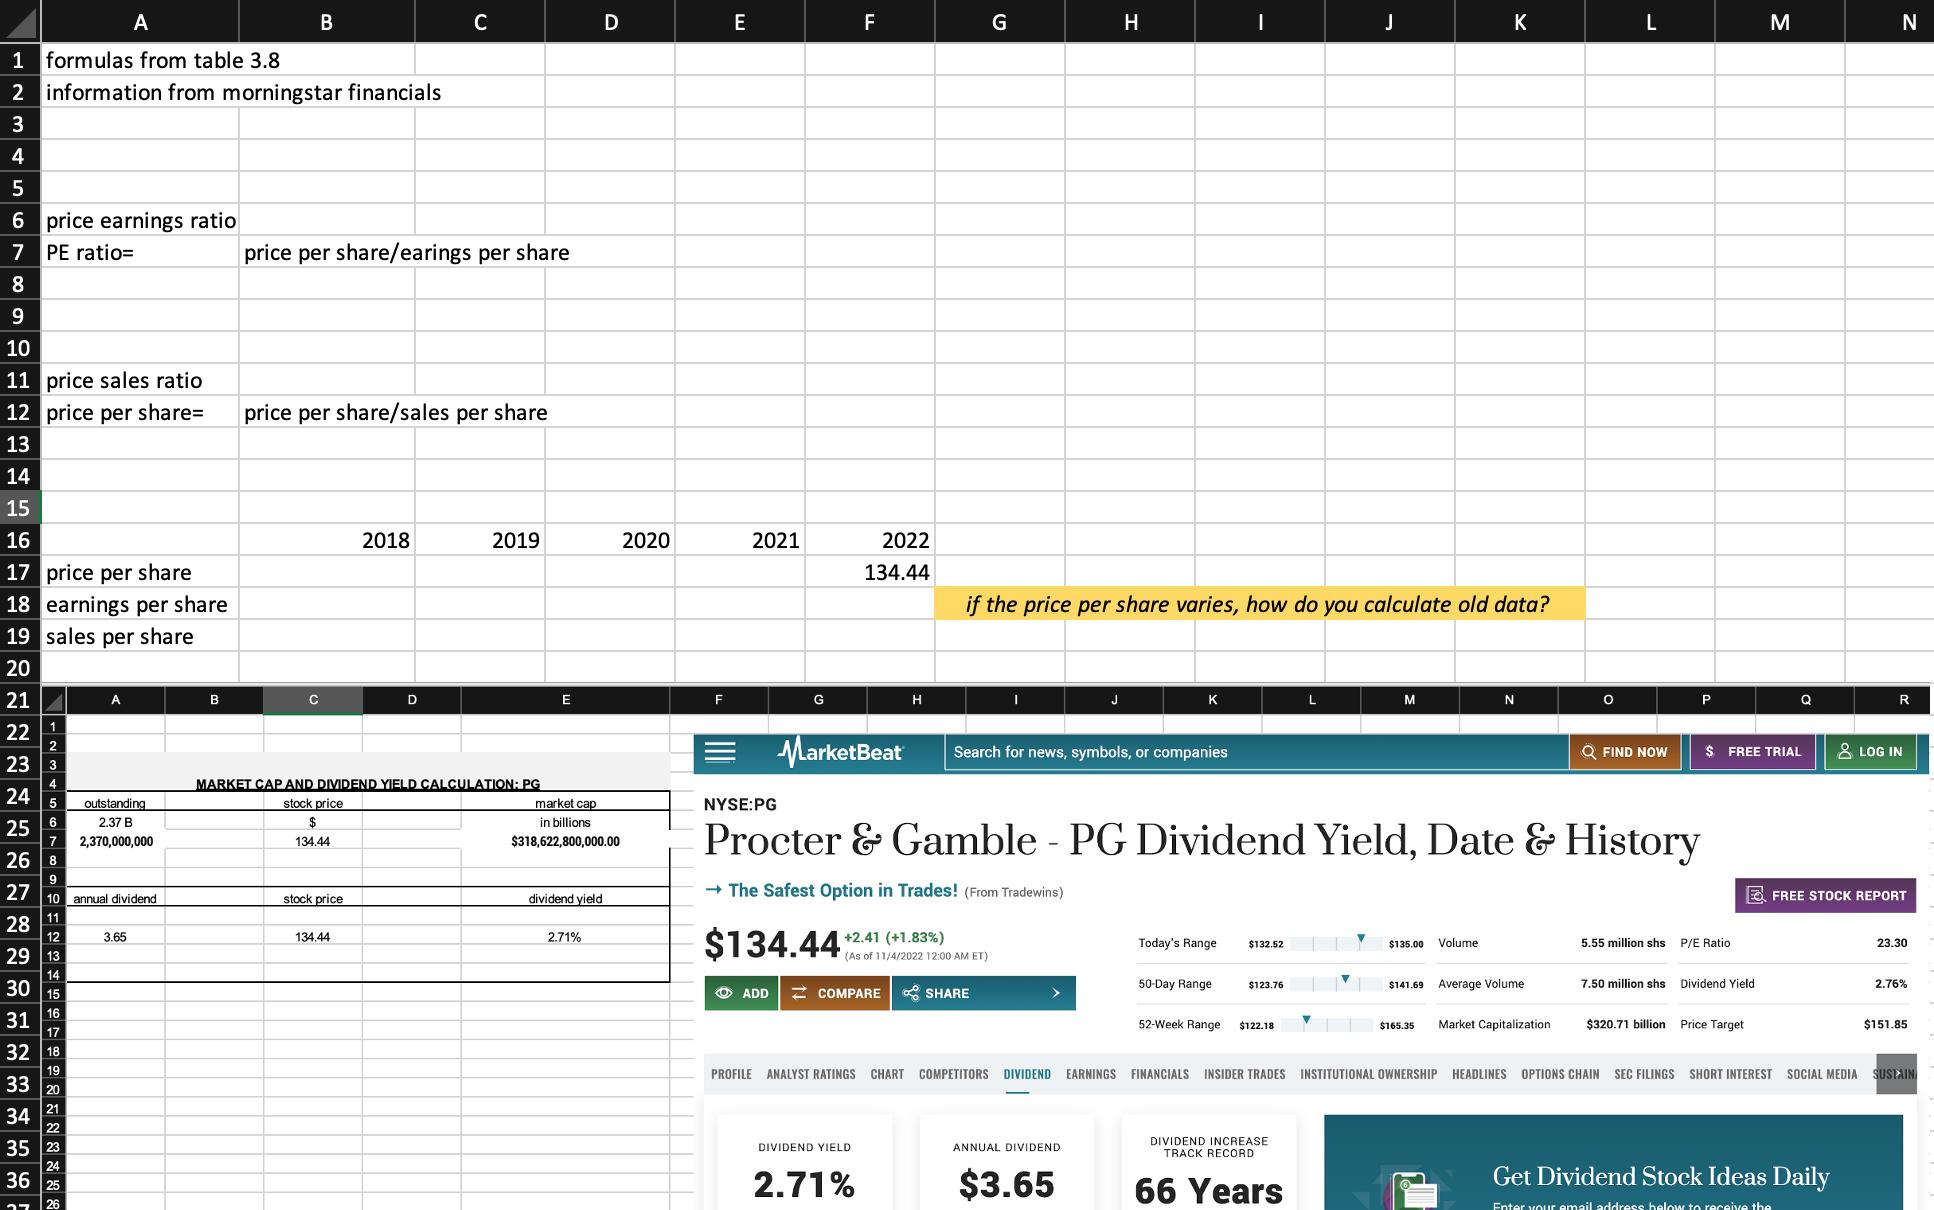 Procter & Gamble - PG Dividend Yield, Date & Histor?